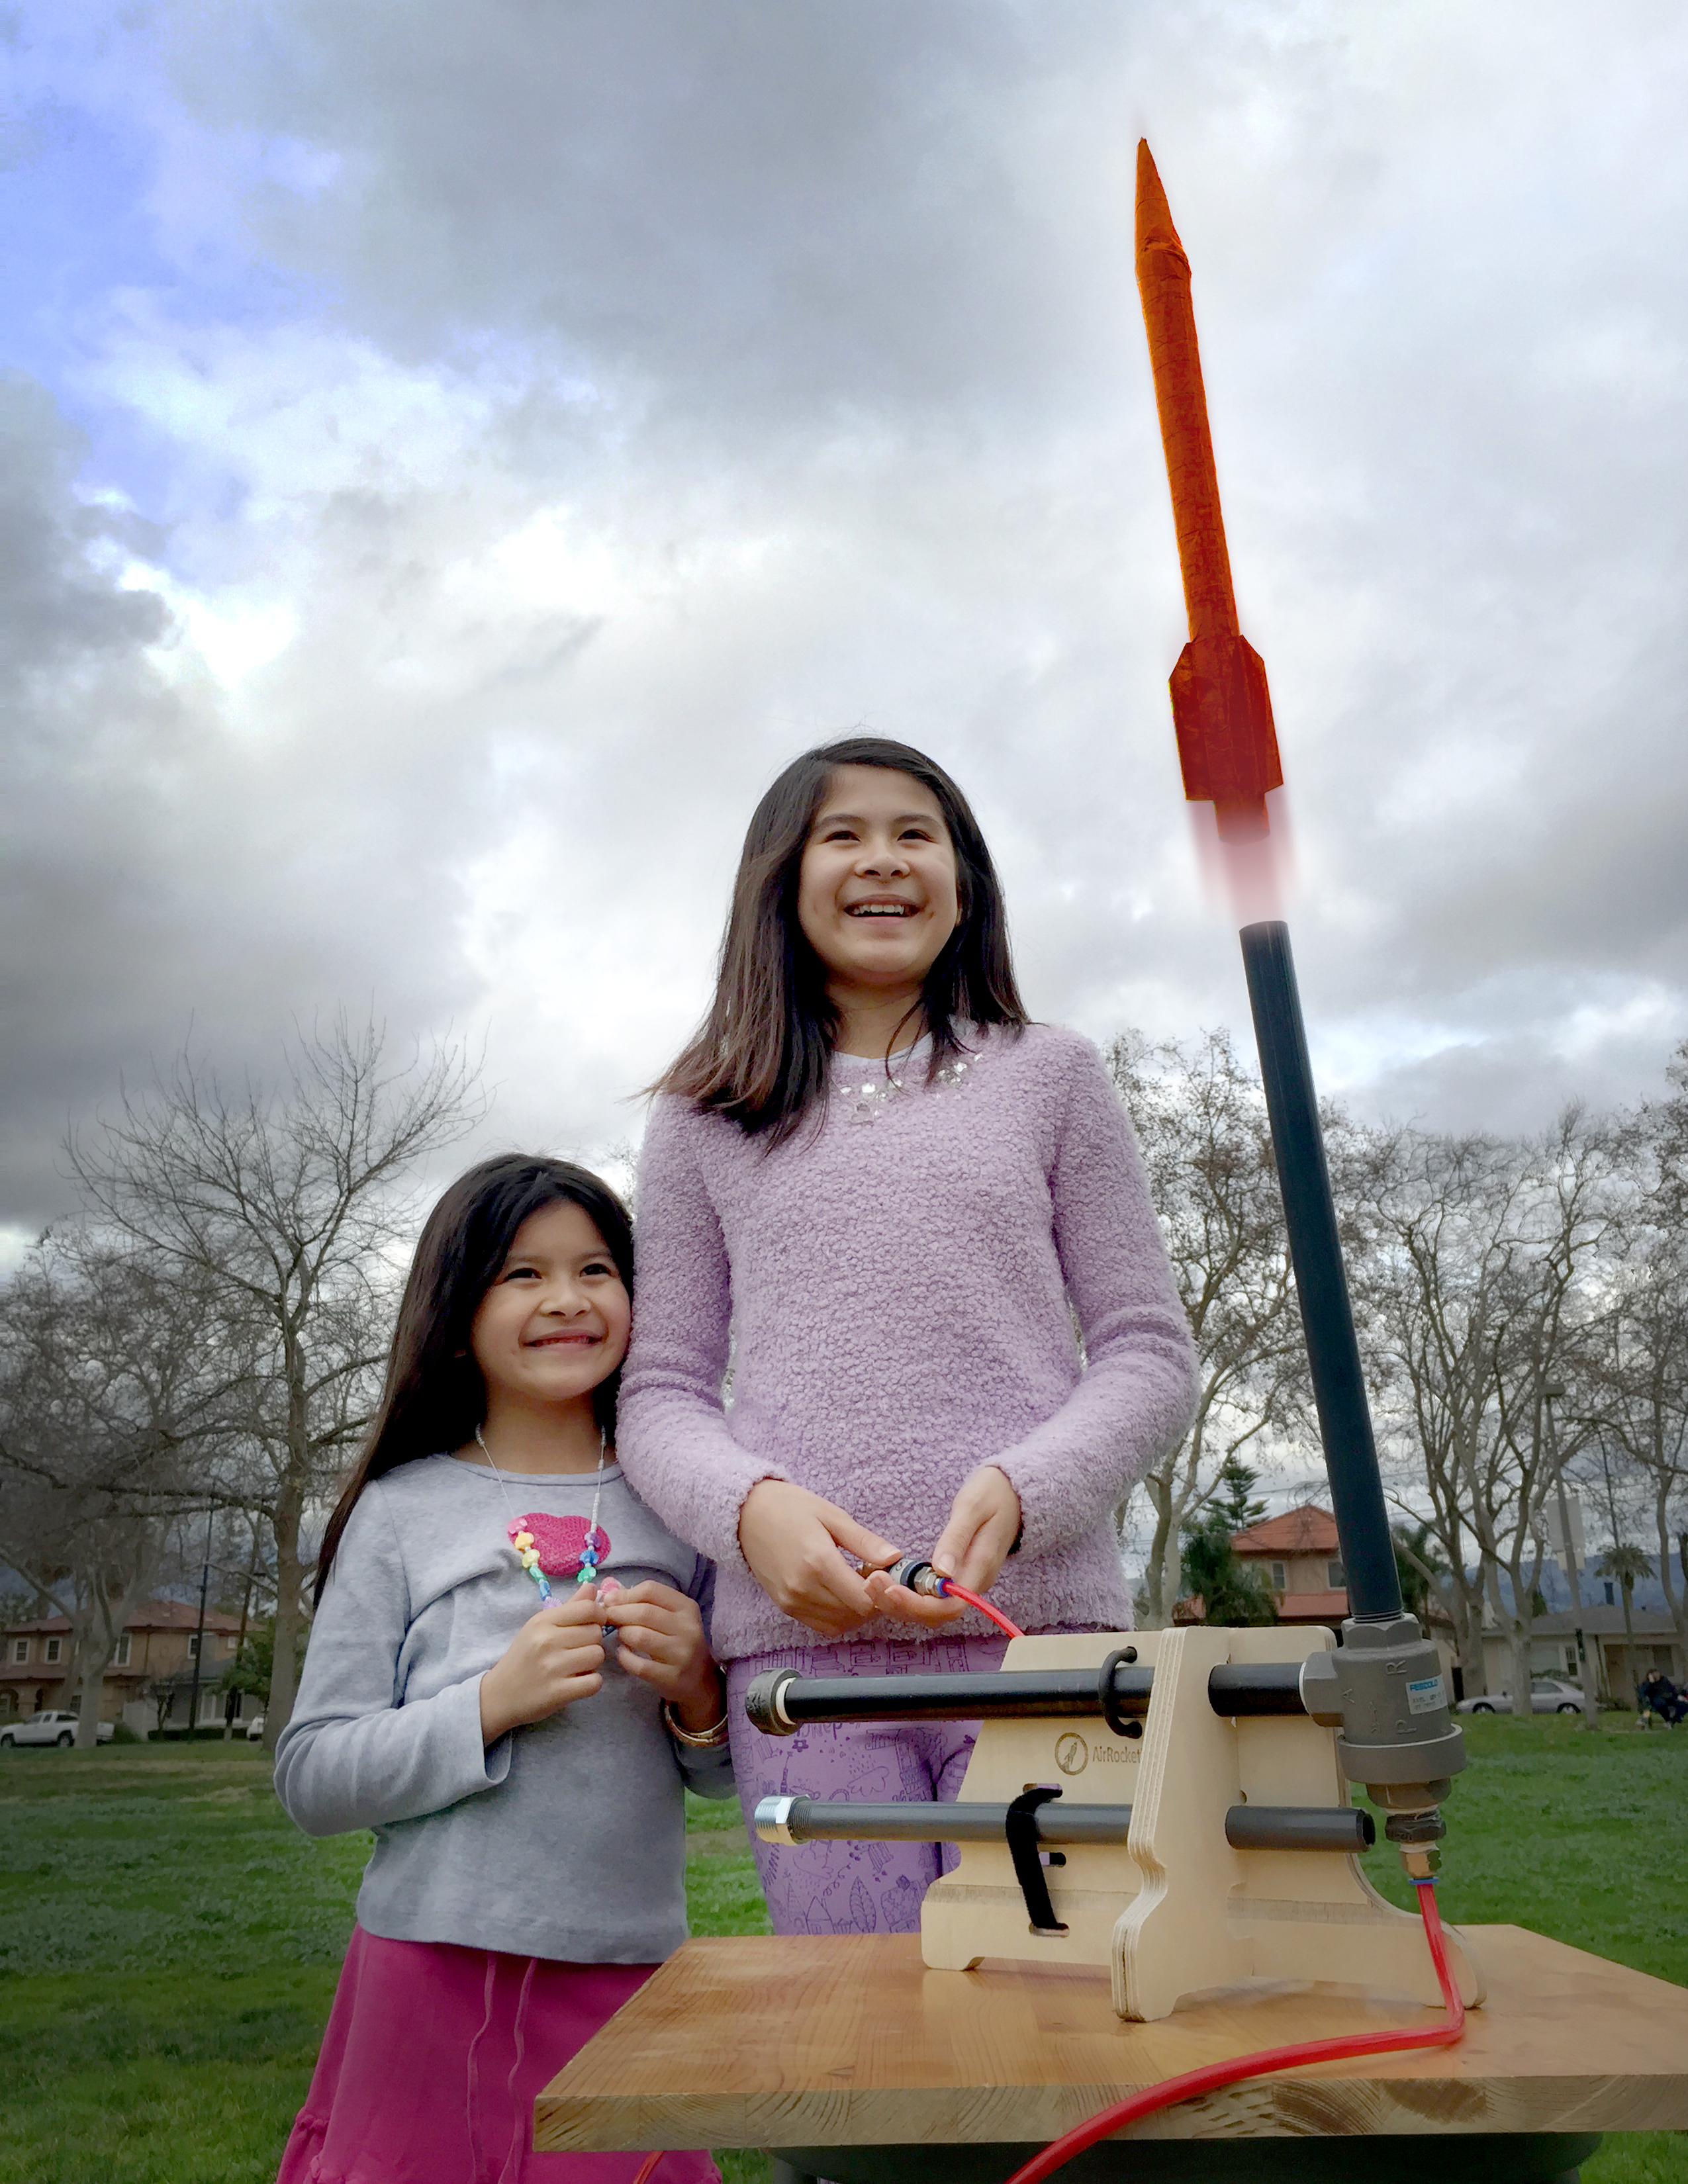 Make and Launch a Compressed Air Rocket